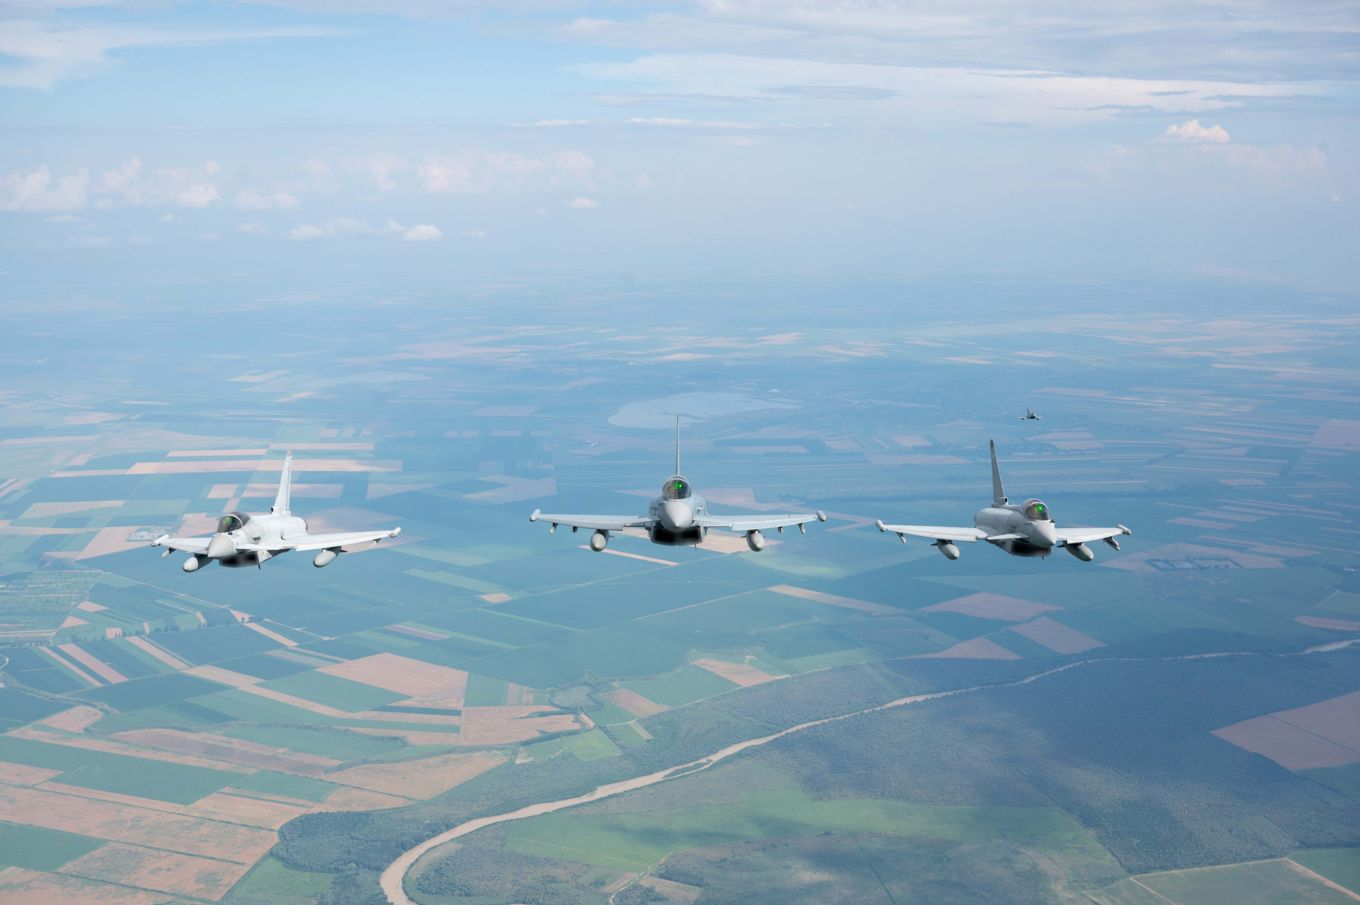 Royal Air Force and German Air Force Conclude NATO Air Policing Integration Training